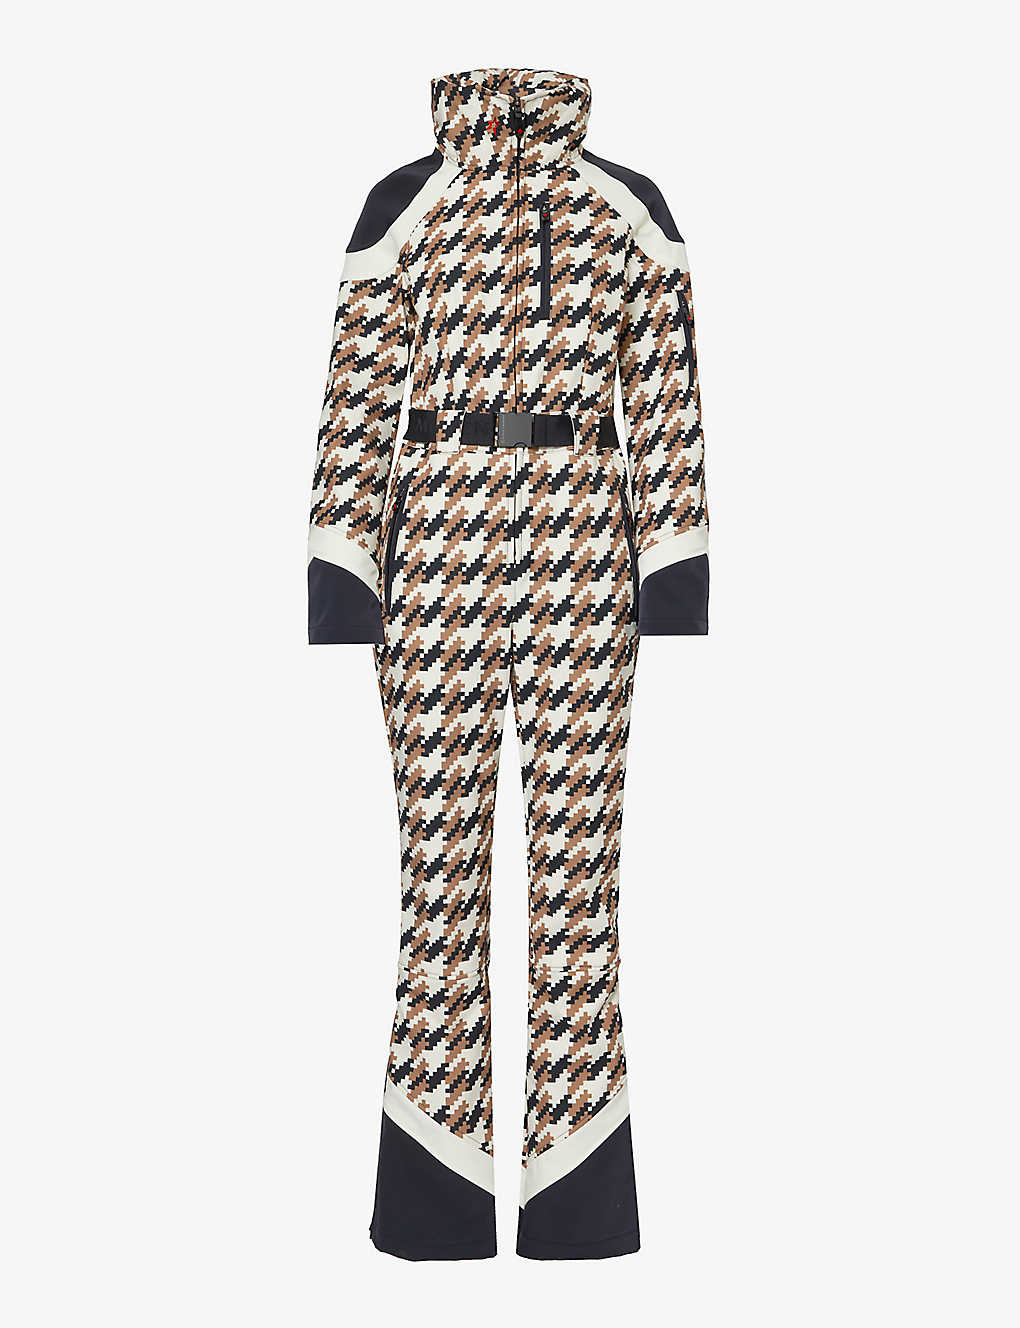 PERFECT MOMENT PERFECT MOMENT WOMEN'S HOUNDSTOOTH ICONIC CAMEL ALLOS HOUNDSTOOTH-CHECKED SKI SUIT